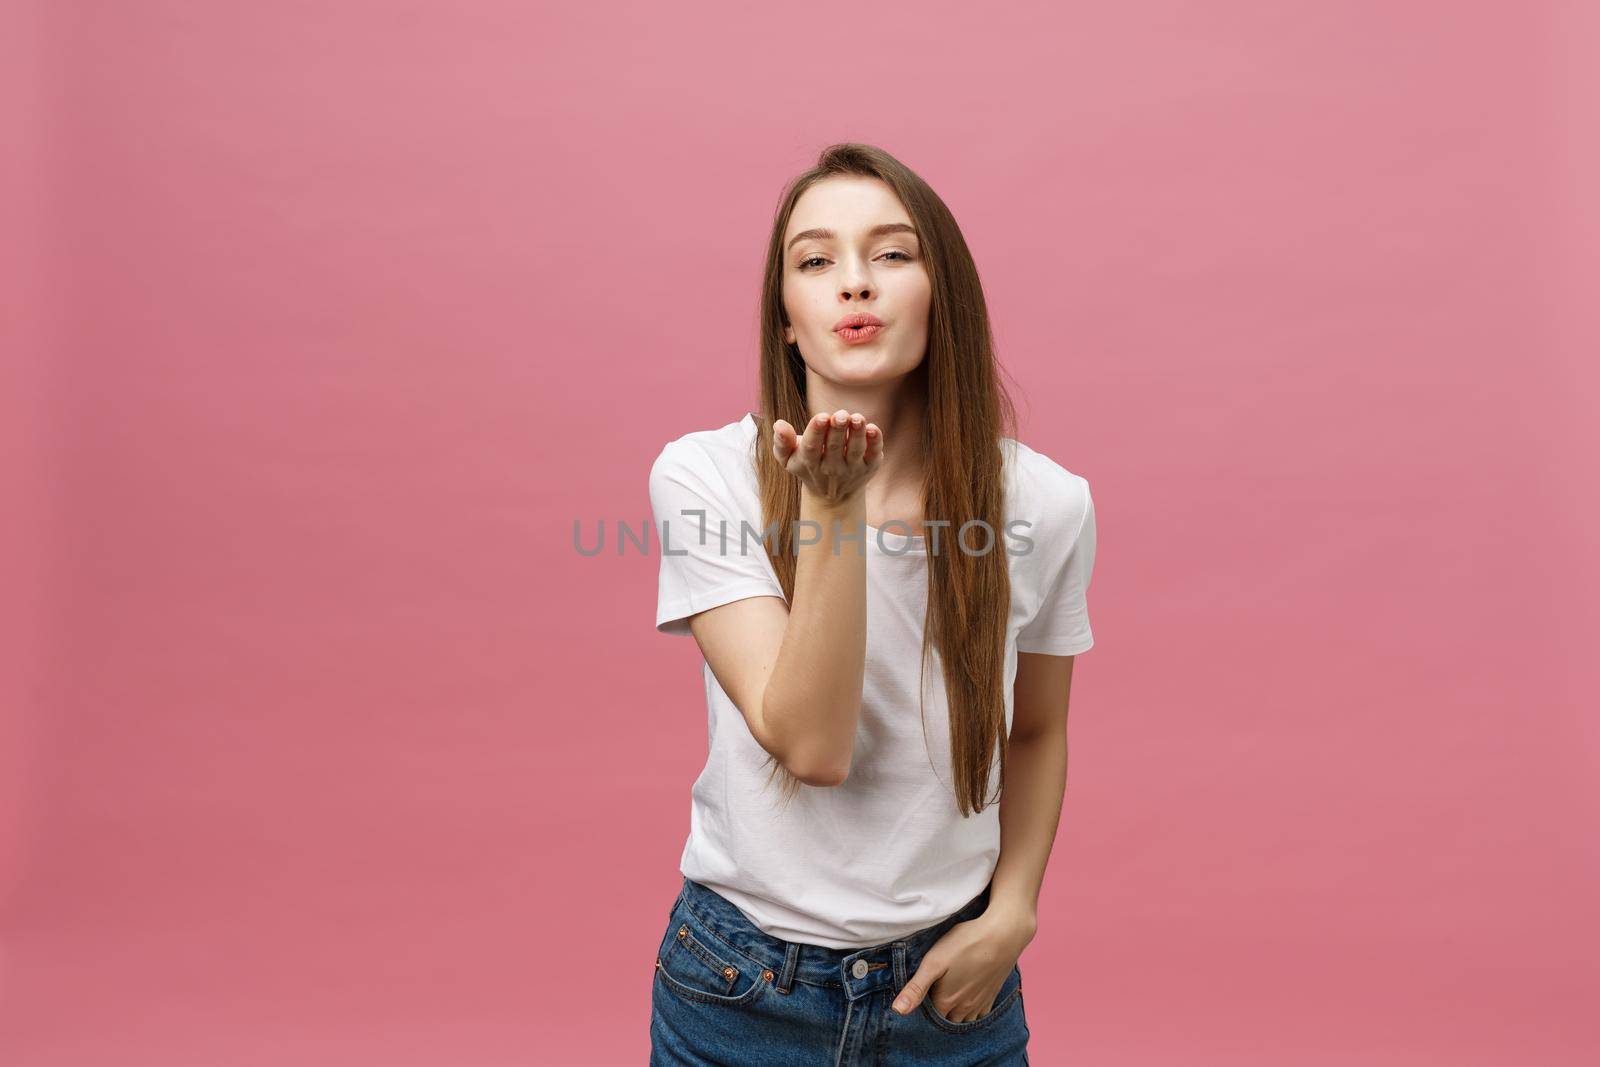 Beautiful woman with makeup and long blonde hair blows kiss, demonstrates her good feelings, says goodbye on distance, isolated over pink background.